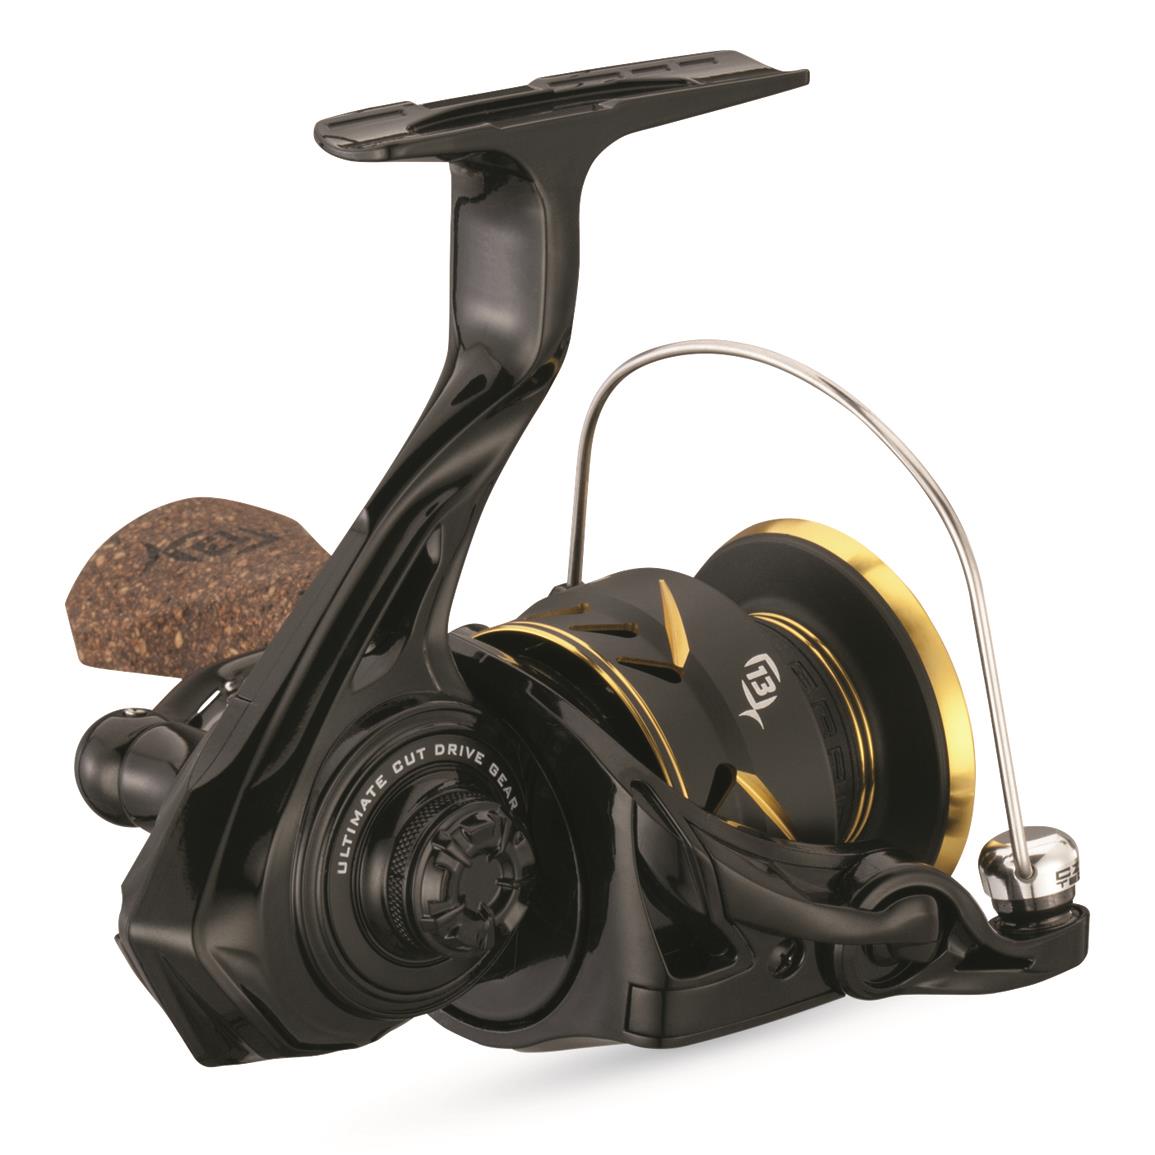 13 Fishing Blackout Spinning Reel, 5.2:1 Gear Ratio, Size 2000